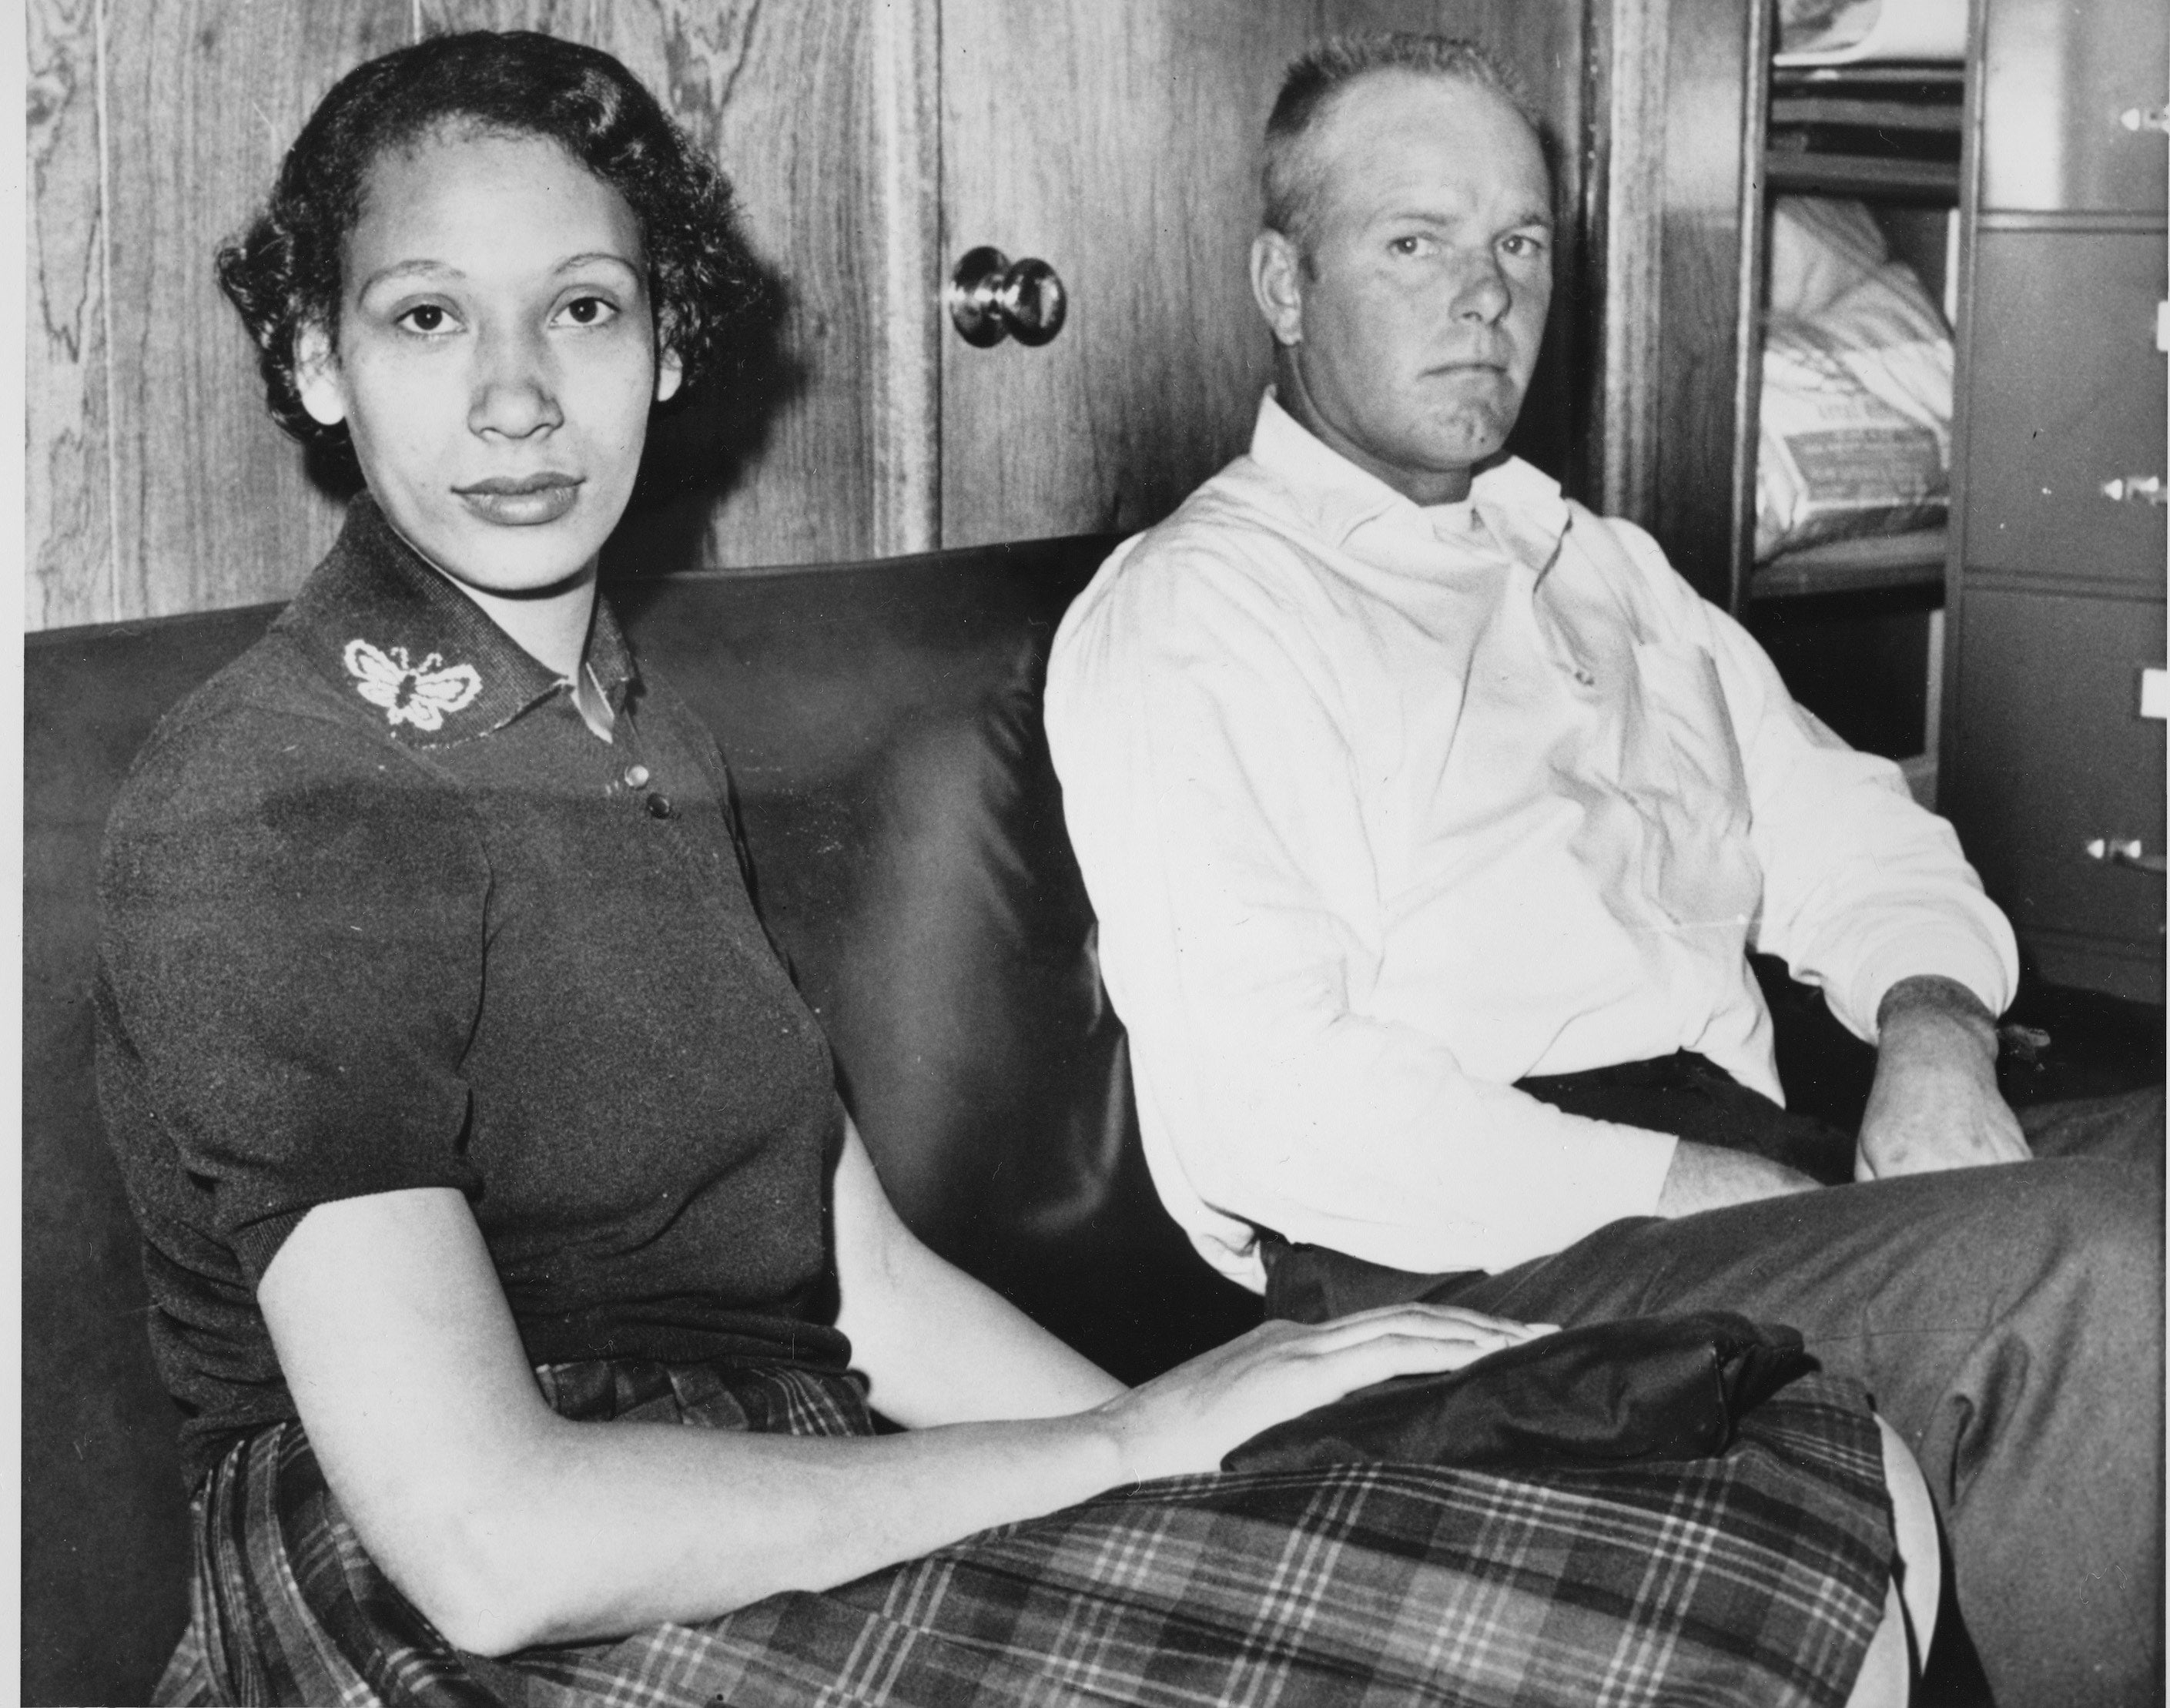 AP WAS THERE Supreme Court legalizes interracial marriage The Independent pic